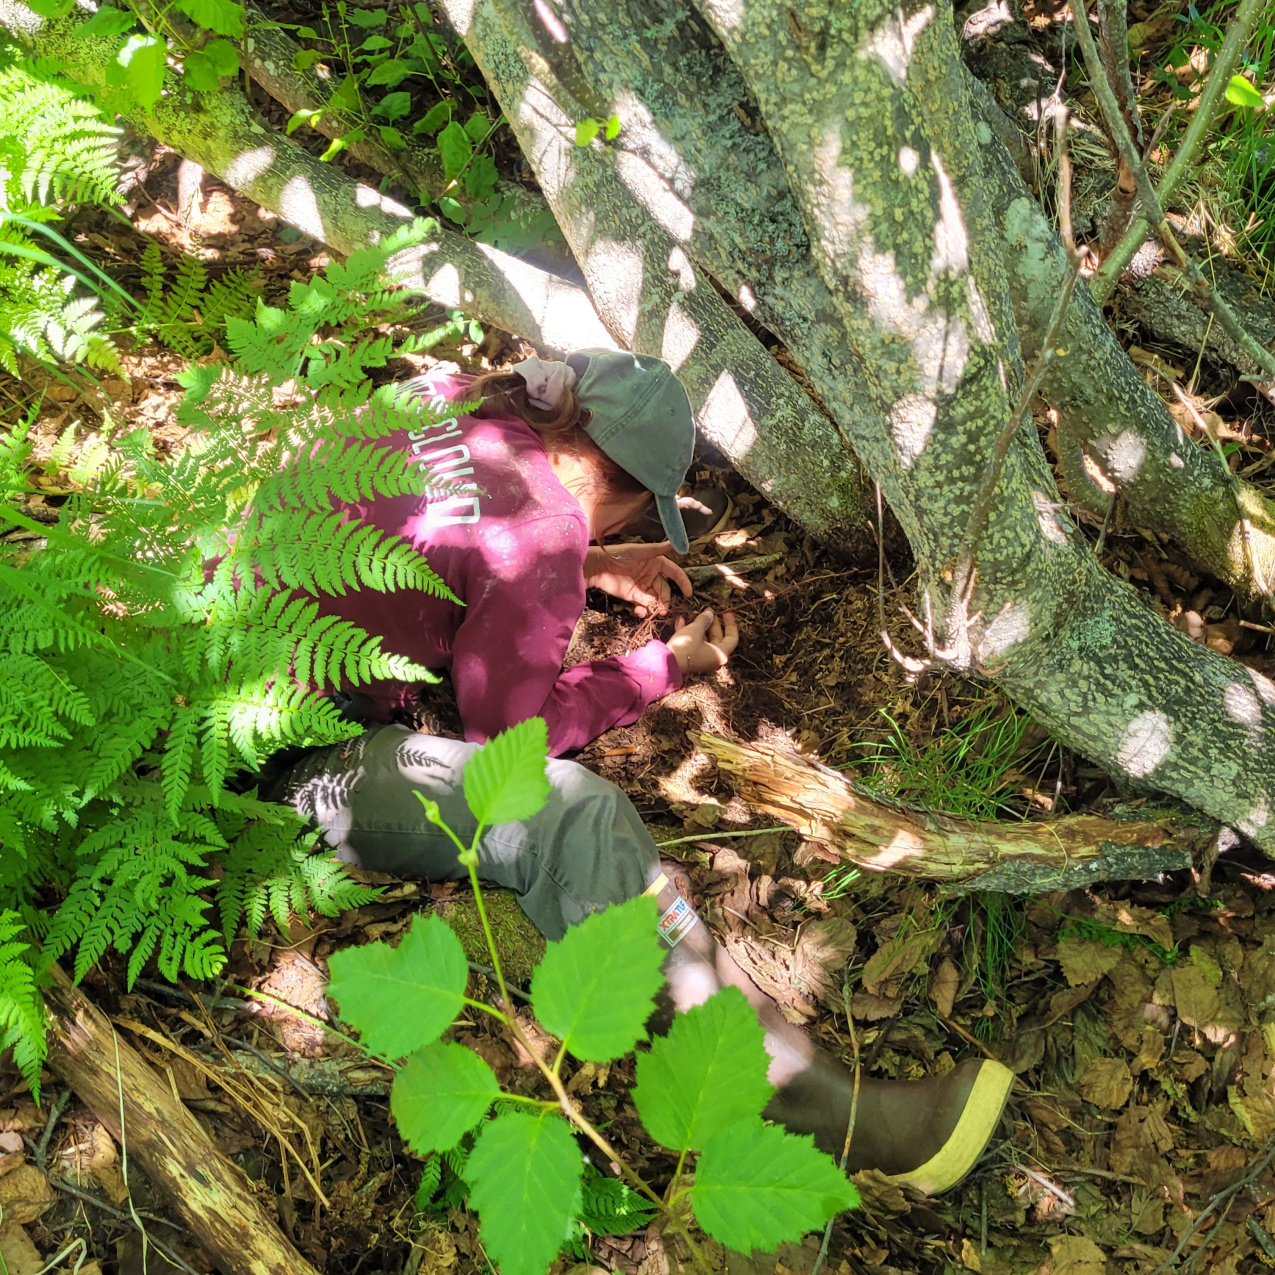 The photo looks down on Ronja, who is bent over looking through thin roots just under the soil in front of a multi-trunked tree. Ferns and other woodland vegetation obscure the view of her.